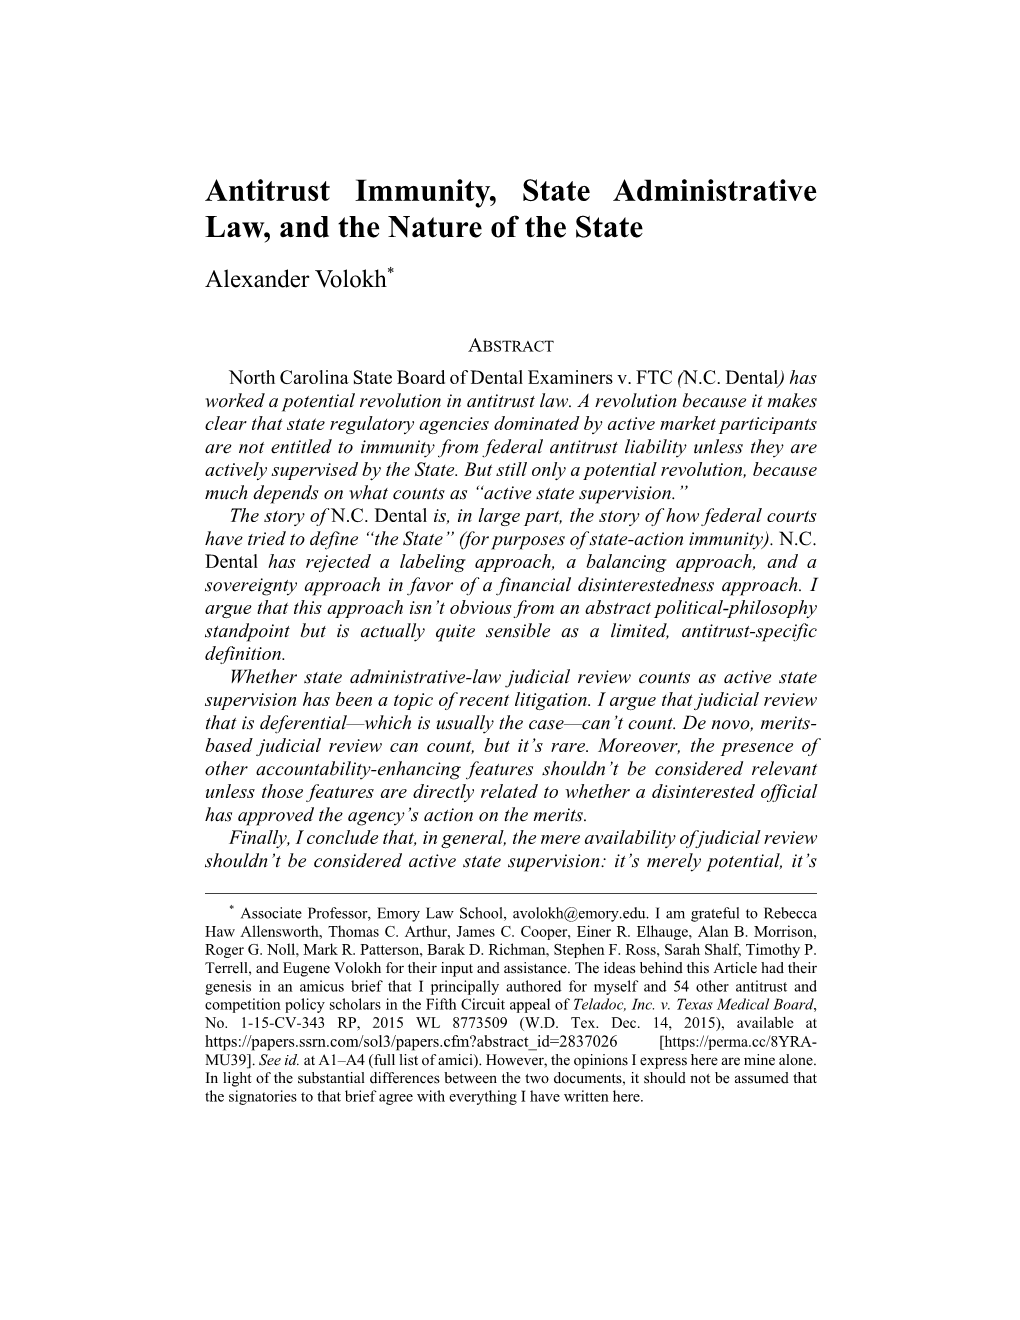 Antitrust Immunity, State Administrative Law, and the Nature of the State